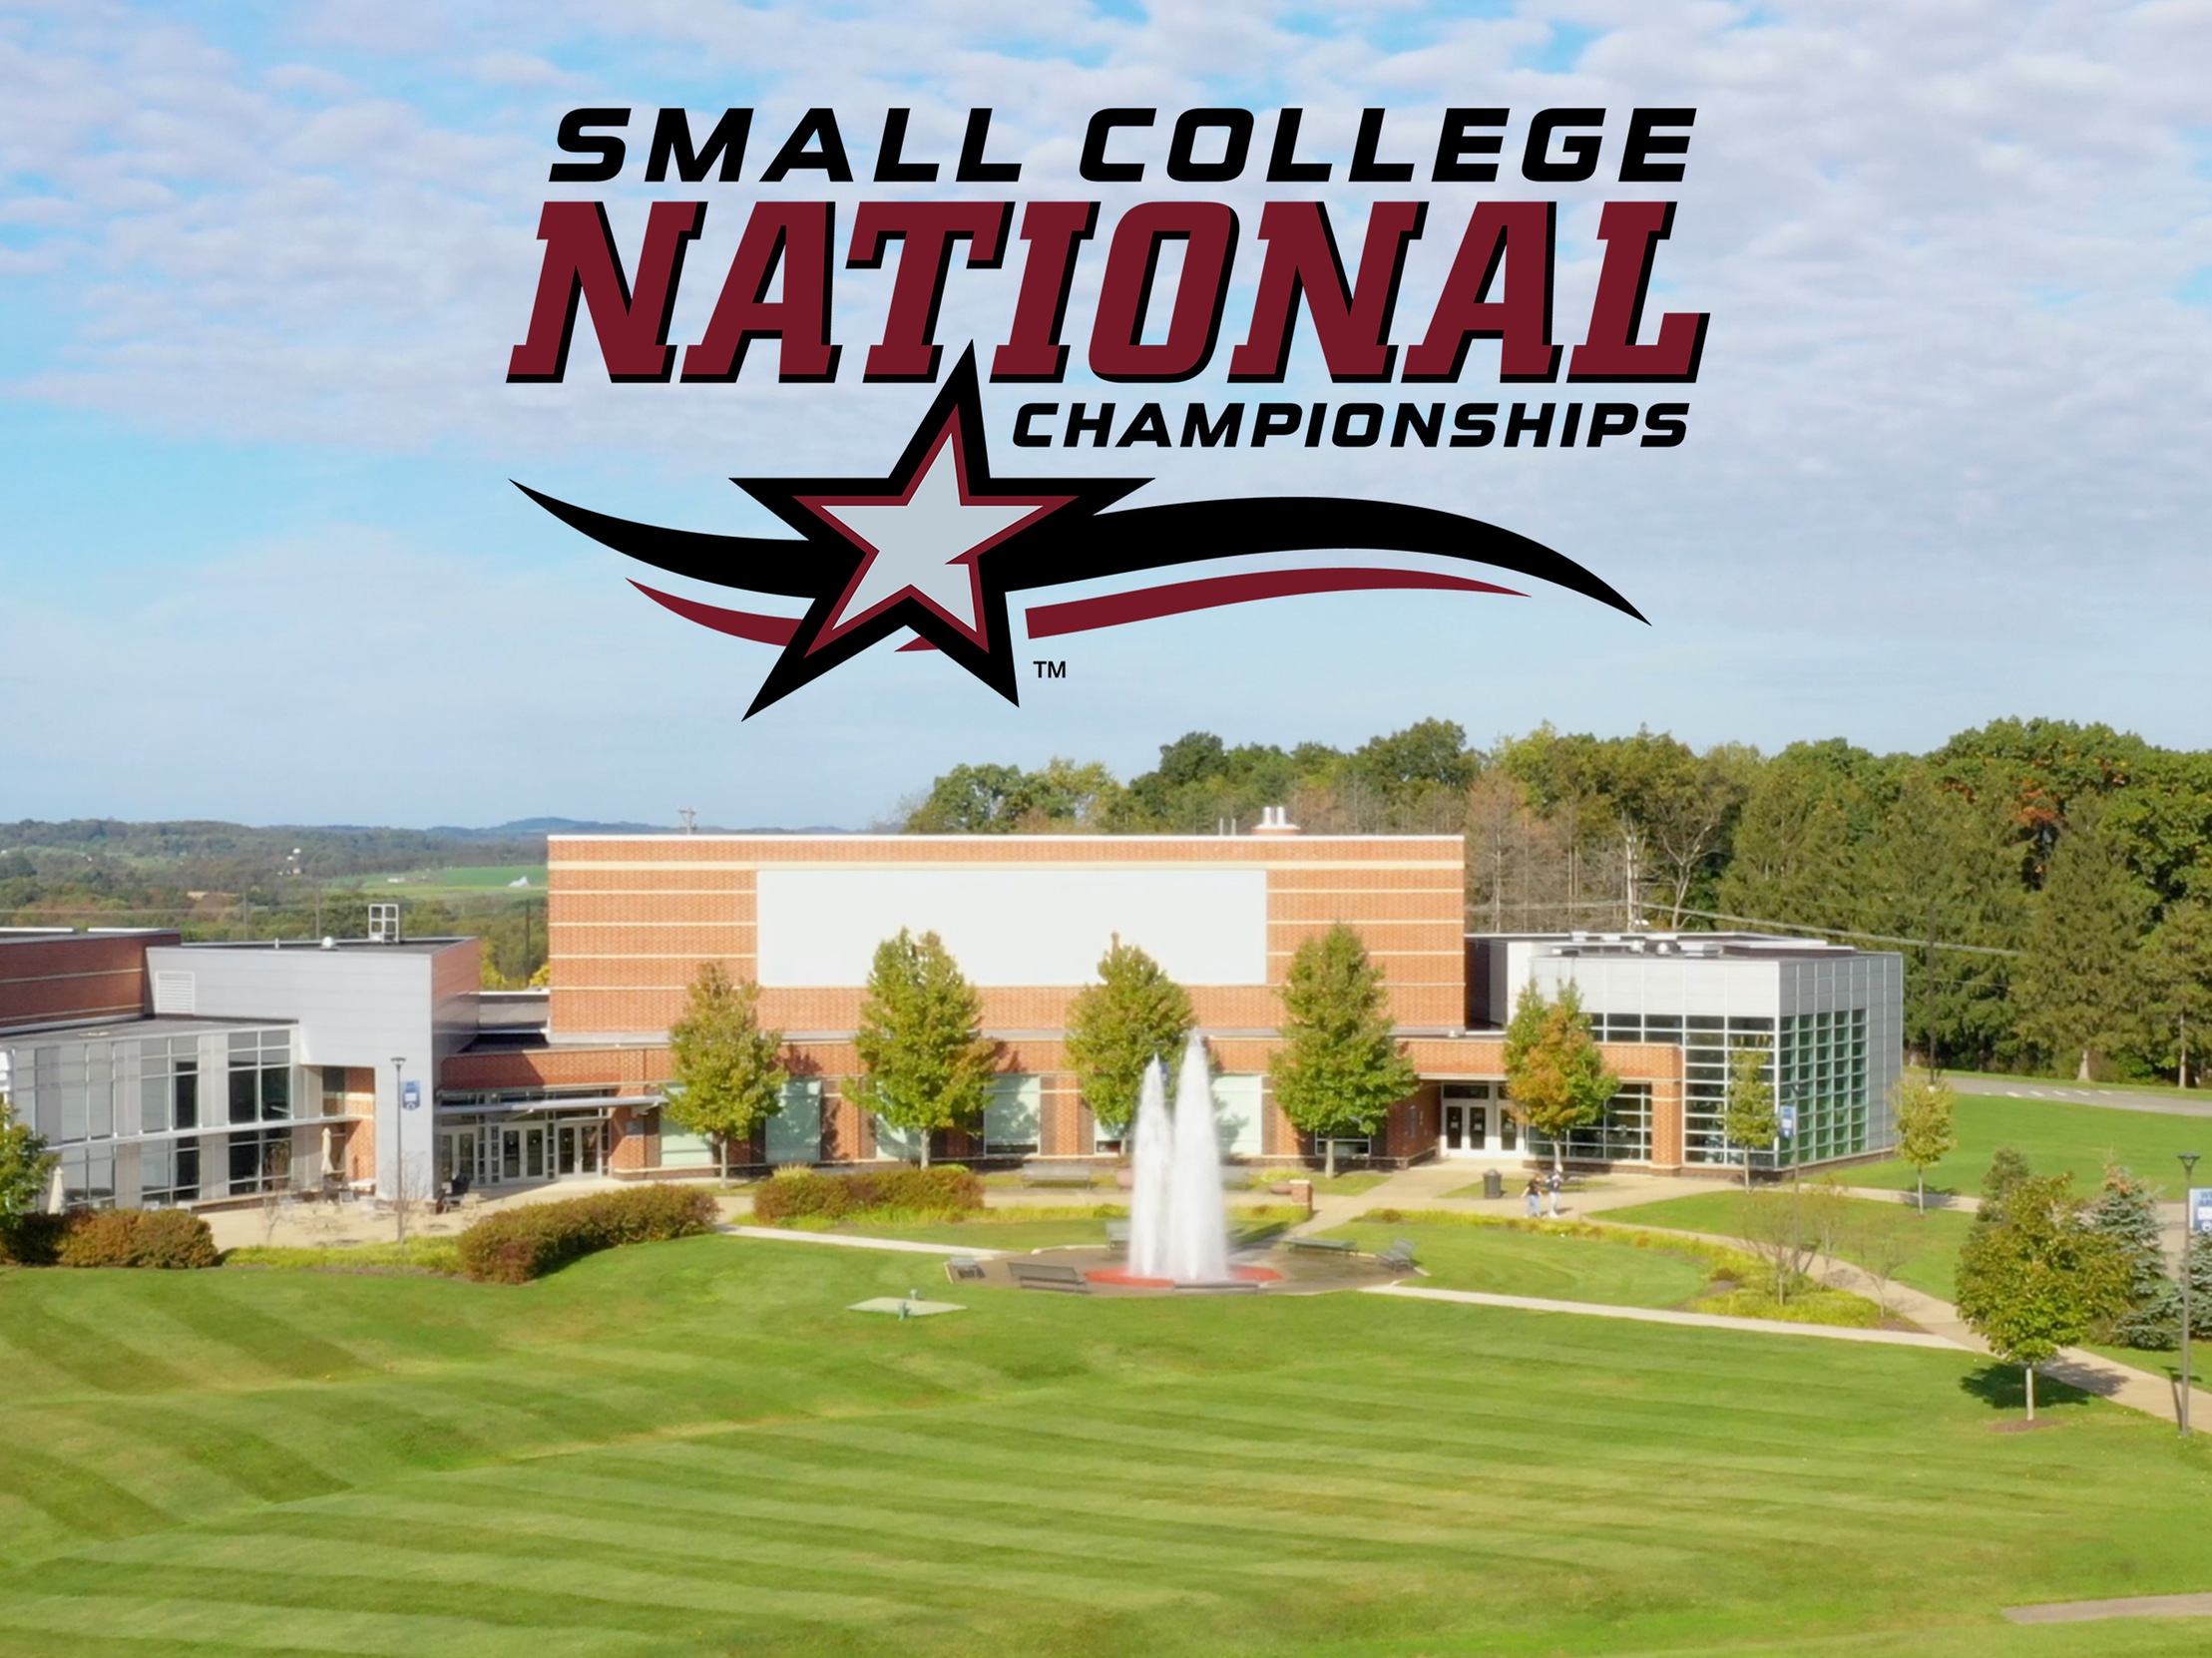 Penn State Fayette hosts the Small College National Championships.